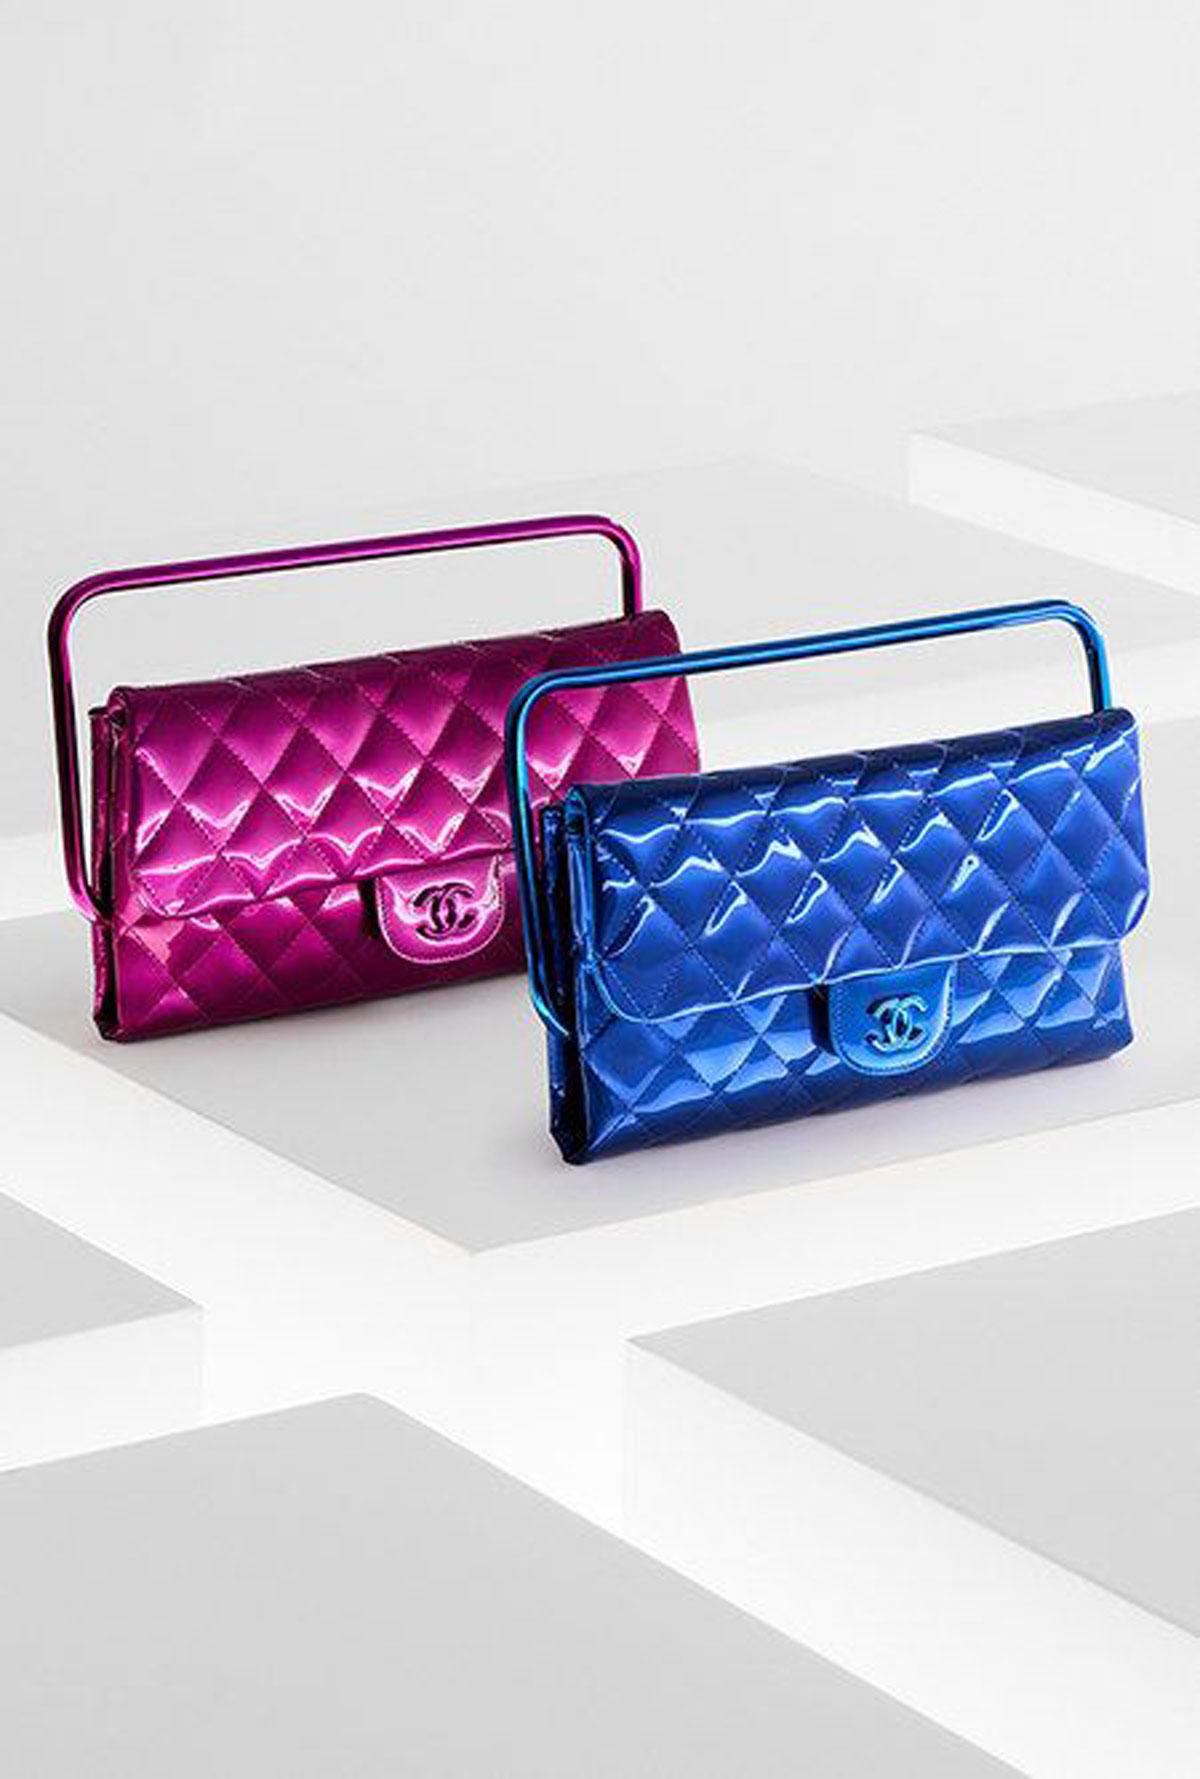 Chanel 2014 Electric Blue Patent Leather Quilted Retractable Frame Clutch Bag For Sale 7